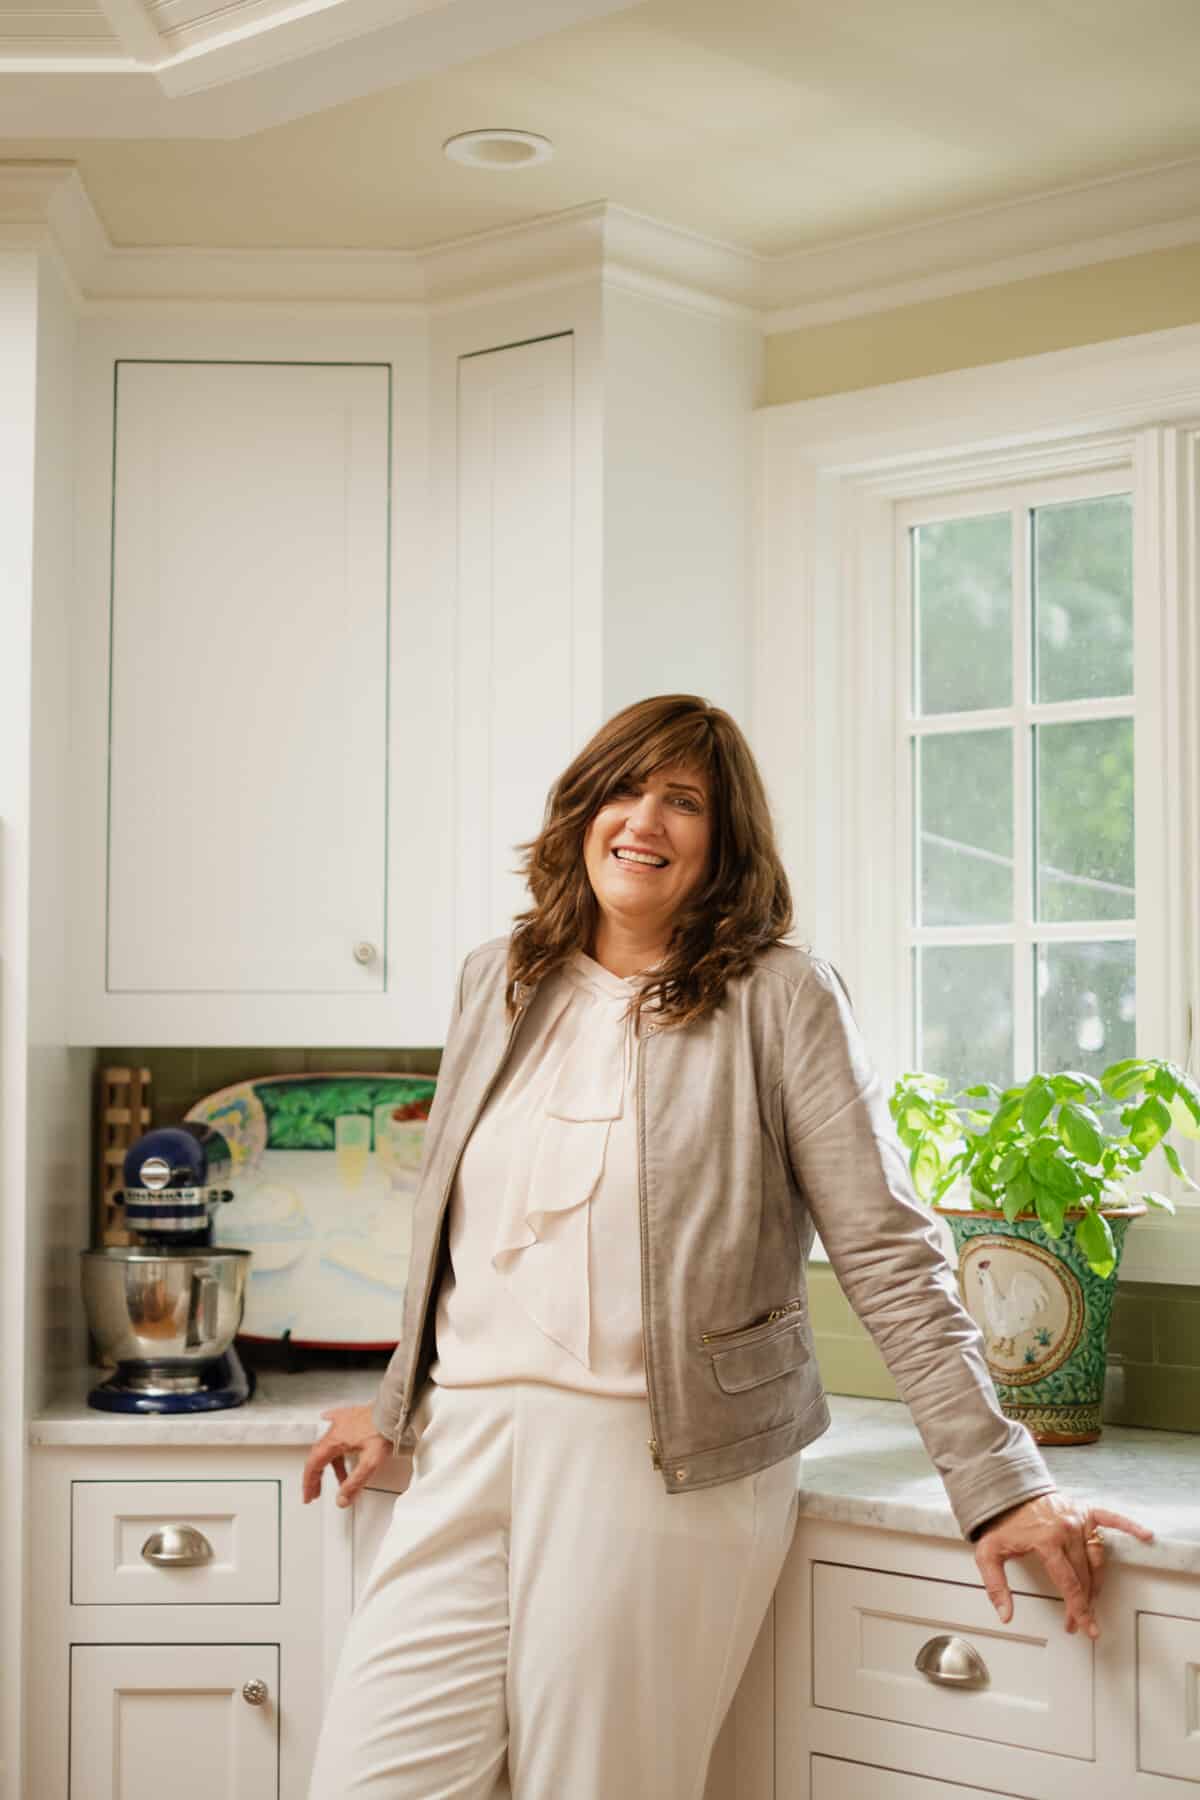 Pam Werley, founder of our table 4 2 standing in the kitchen leaning against counter.